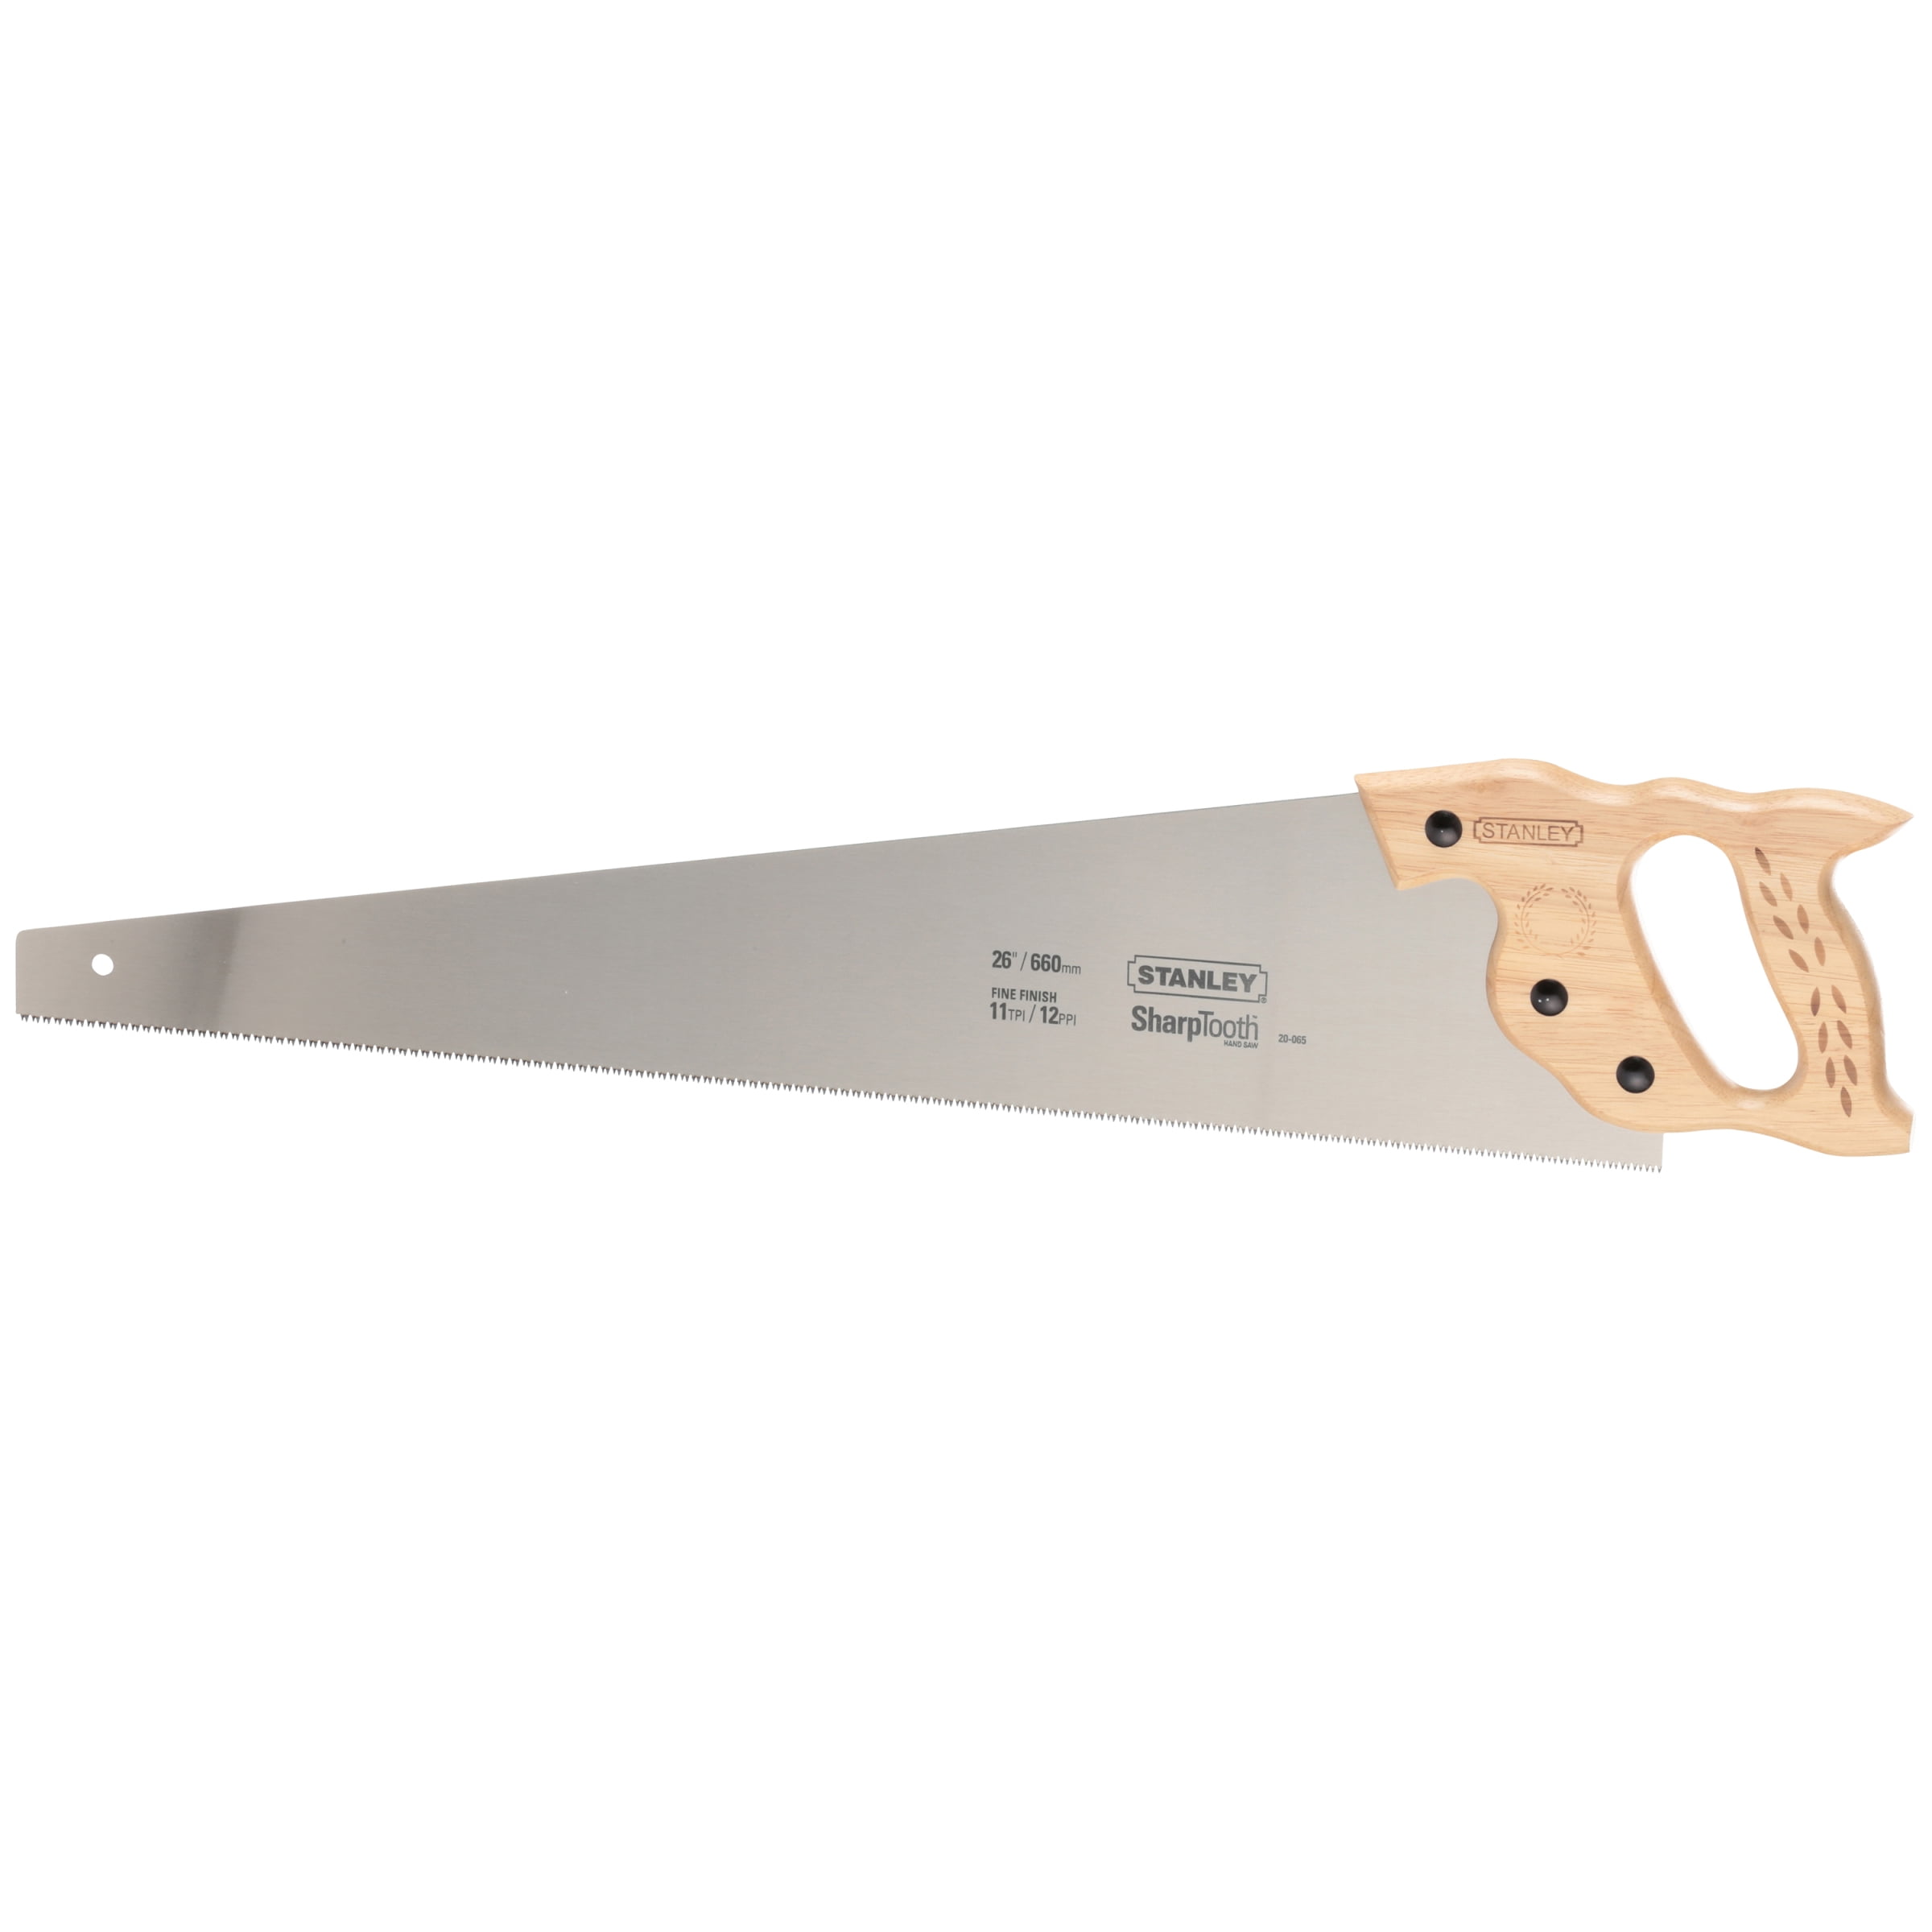 Fine Sharp Tooth Finish Carpenters STANLEY Short-Cut Hand Saw 26 in 